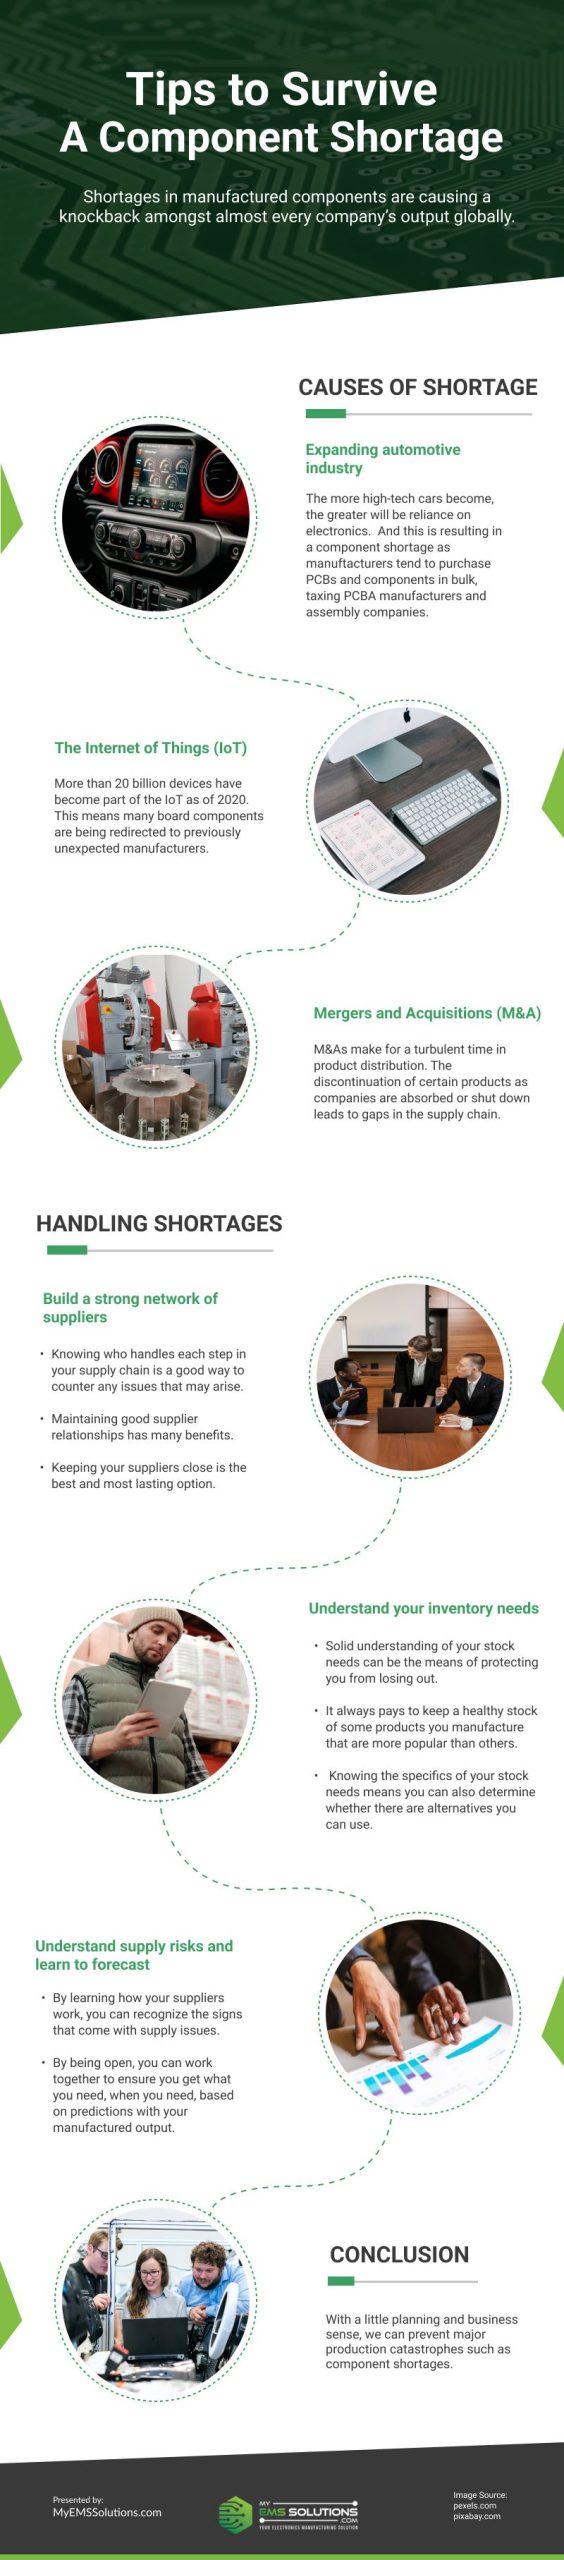 Tips to Survive A Component Shortage Infographic